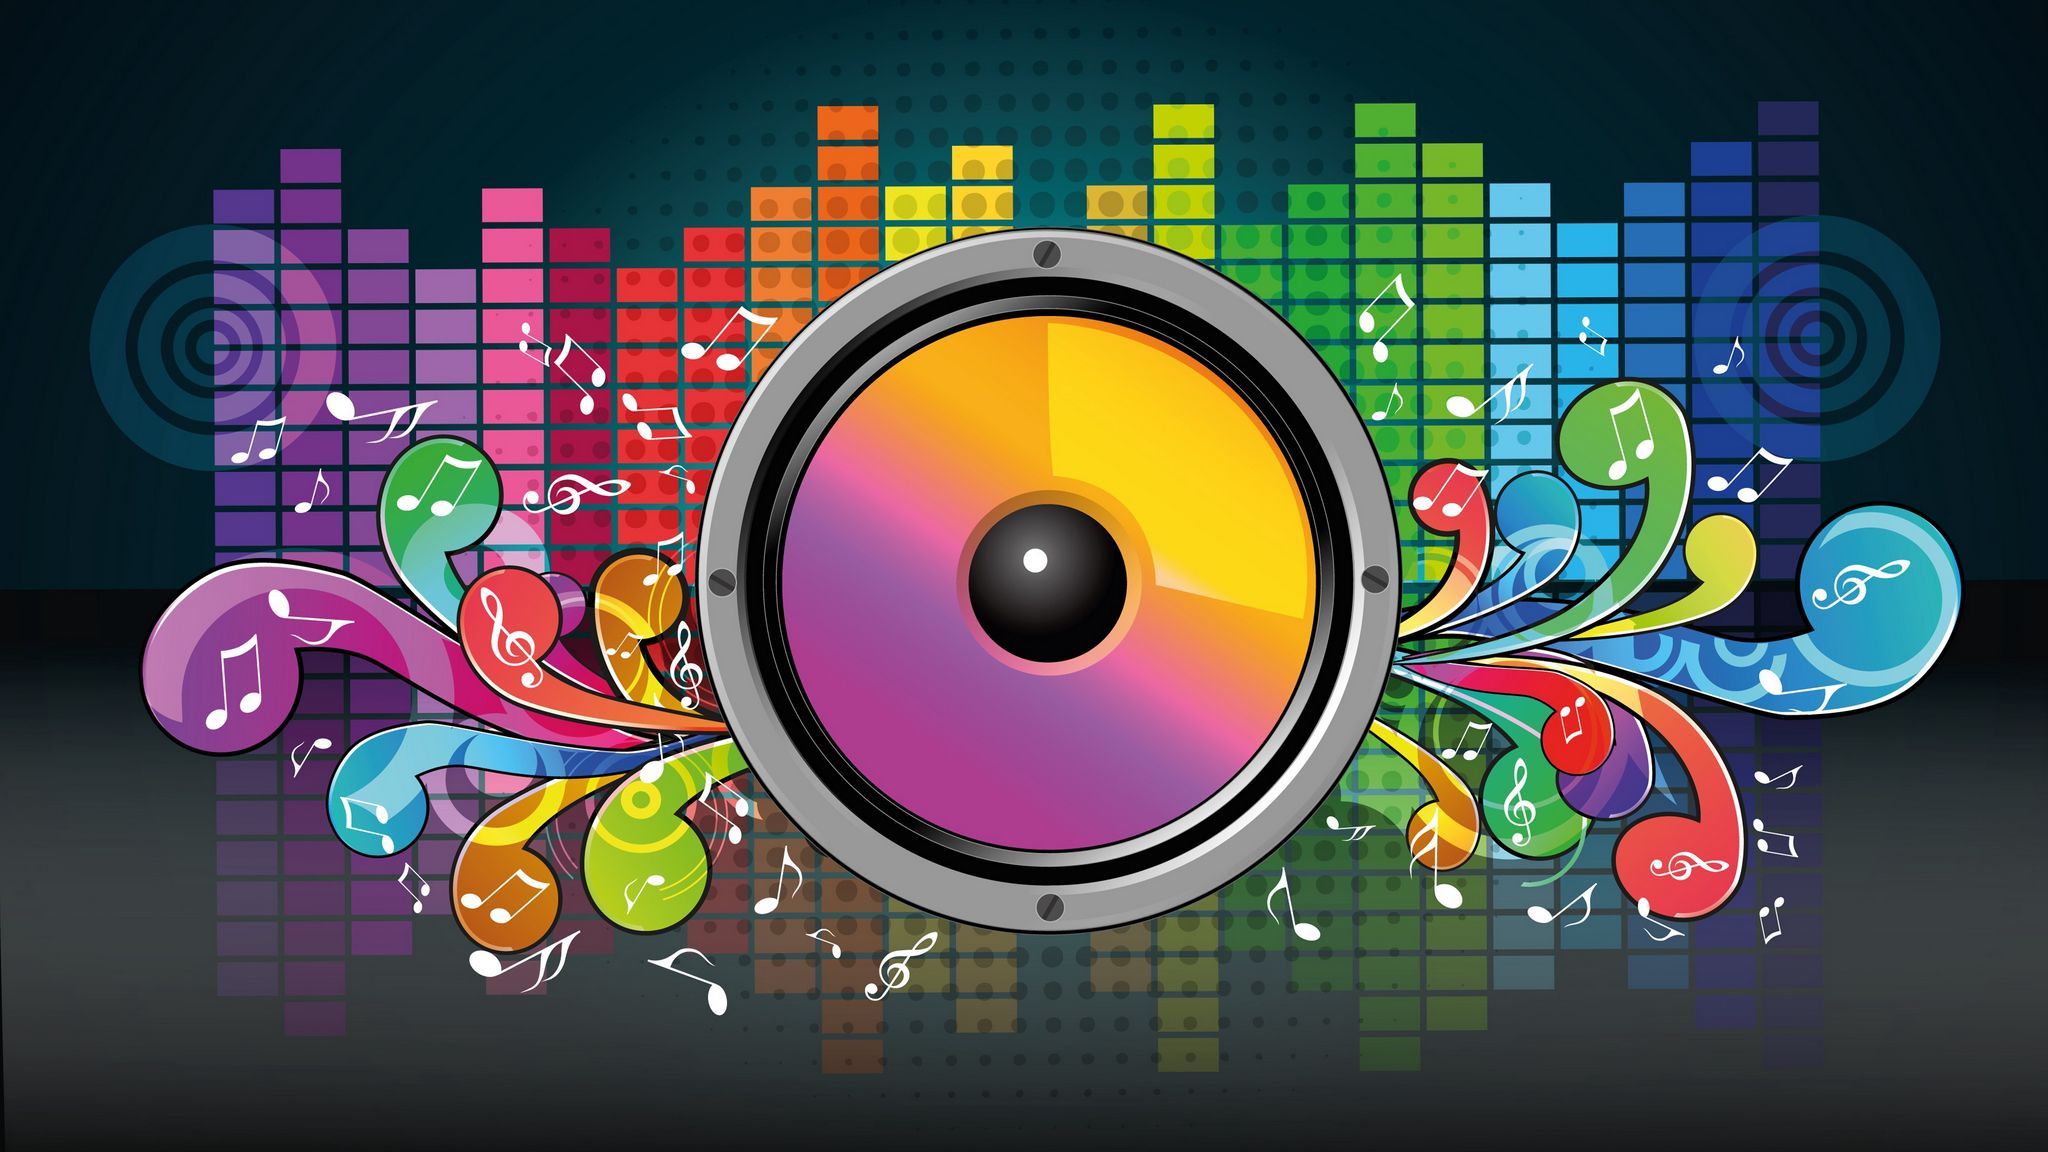 Download wallpapers 2048x1152 speaker, equalizer, musical notes, music ultrawide monitor hd backgrounds